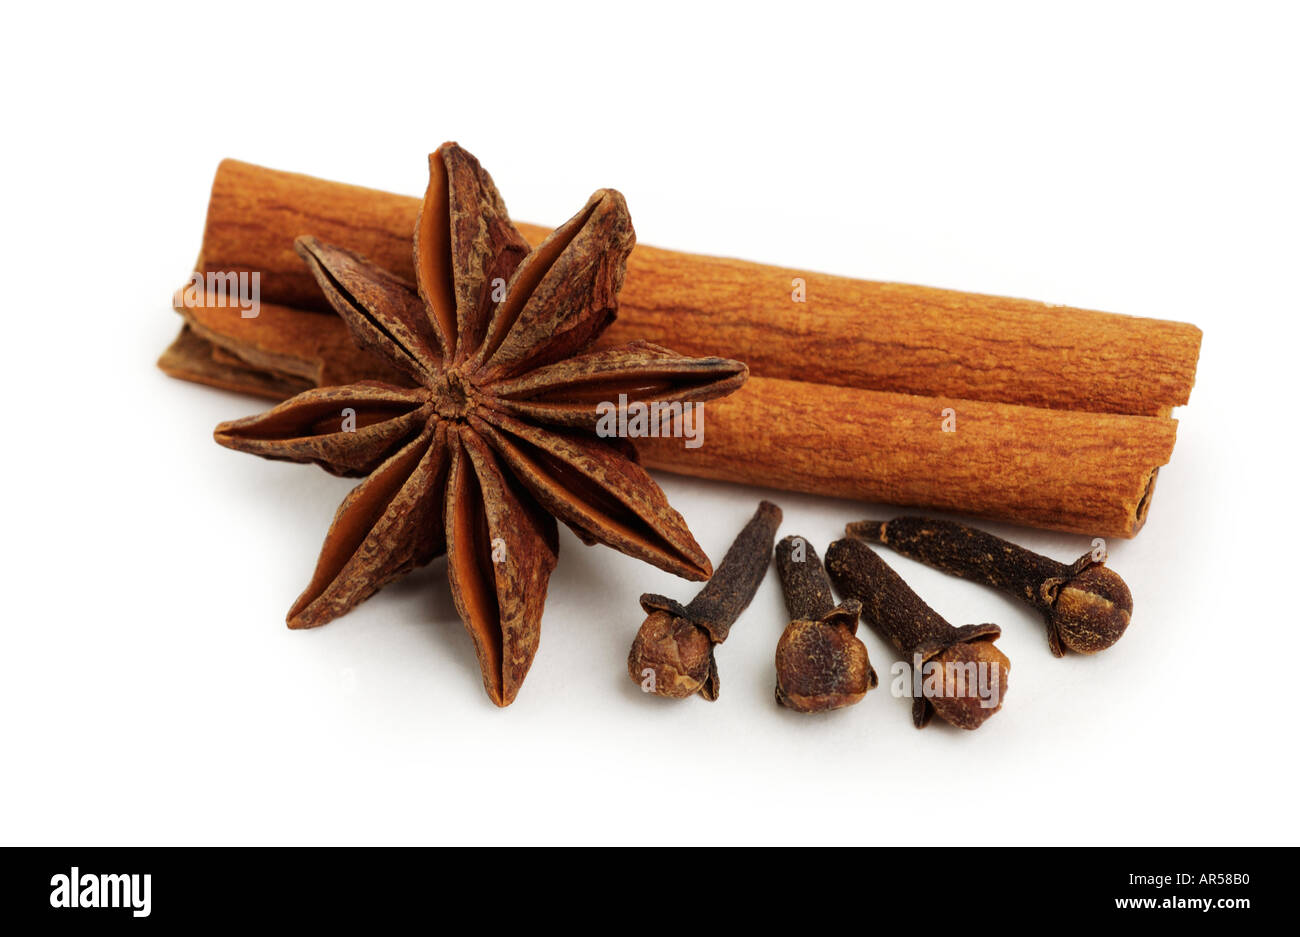 Spices Cinnamon stick star anise and cloves Stock Photo